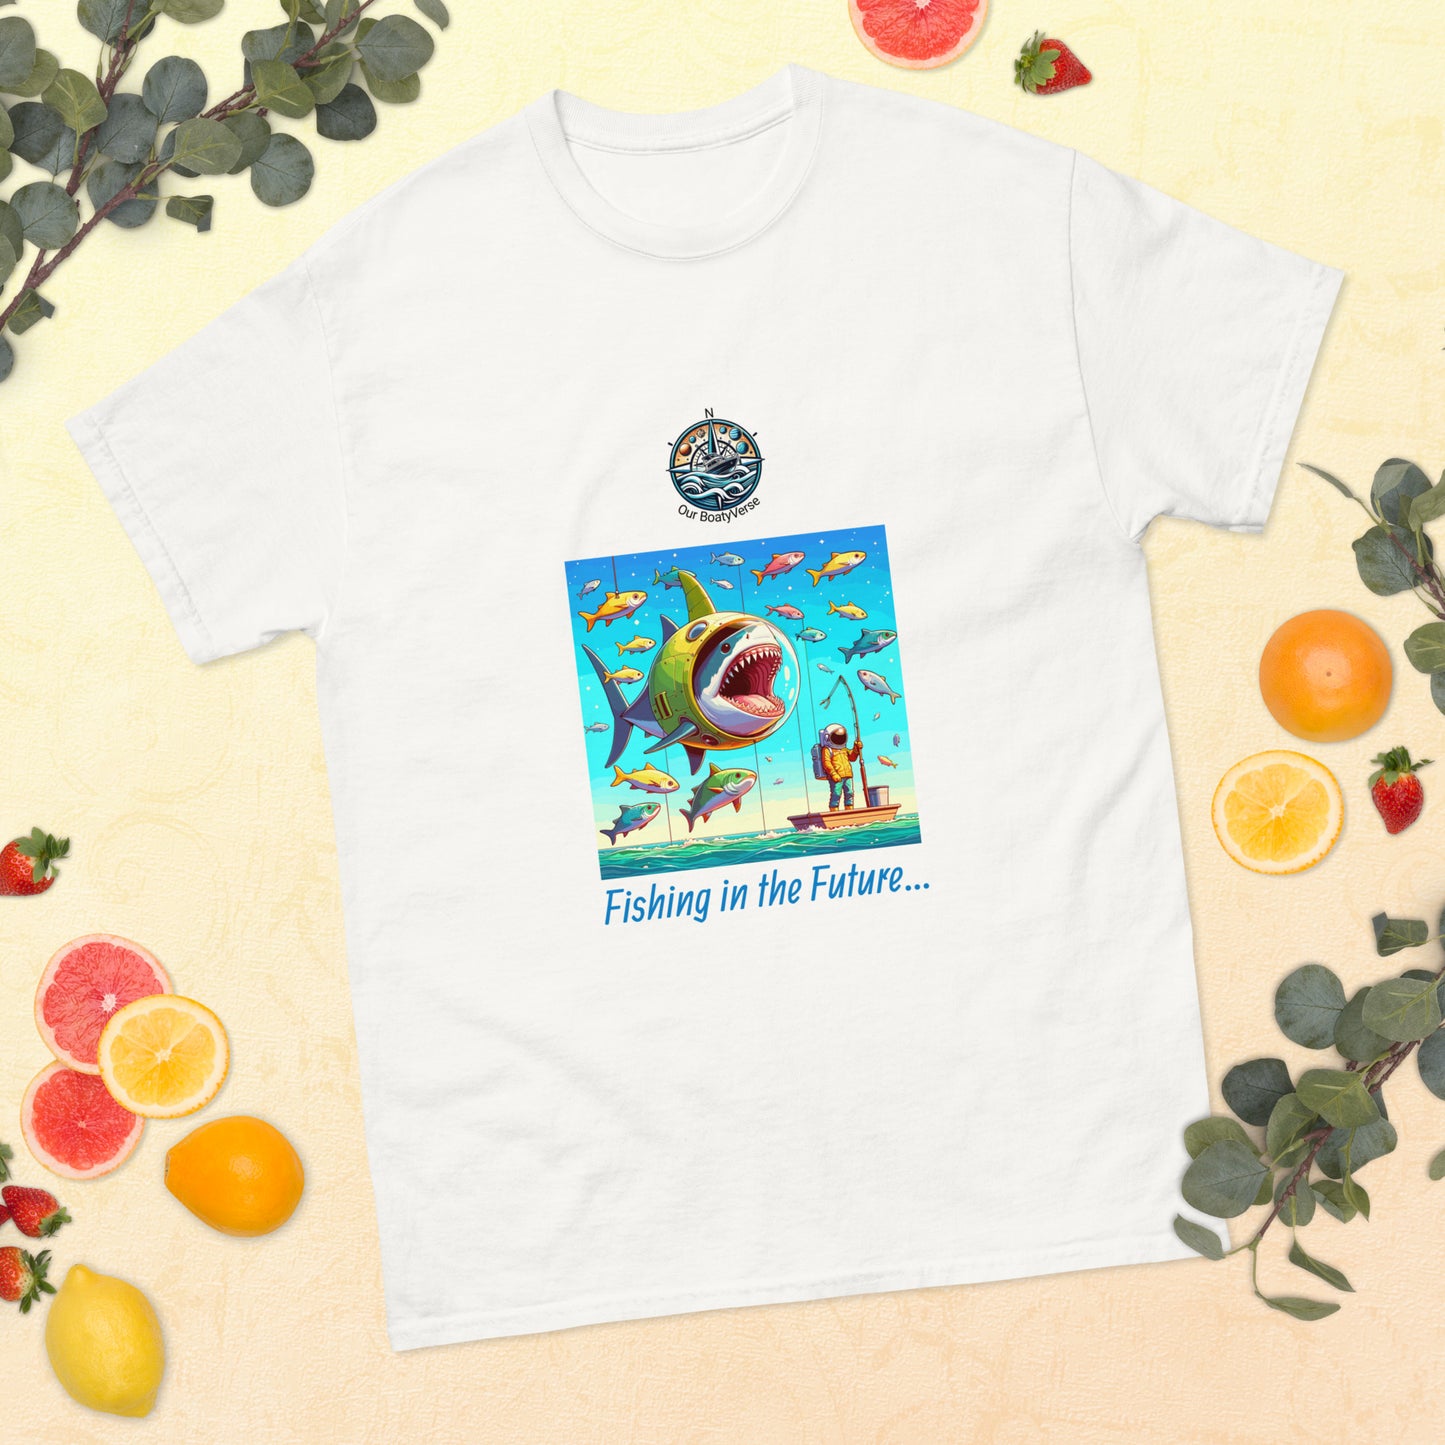 Novelty Fishing in the Future Men's T-Shirt by Our BoatyVerse